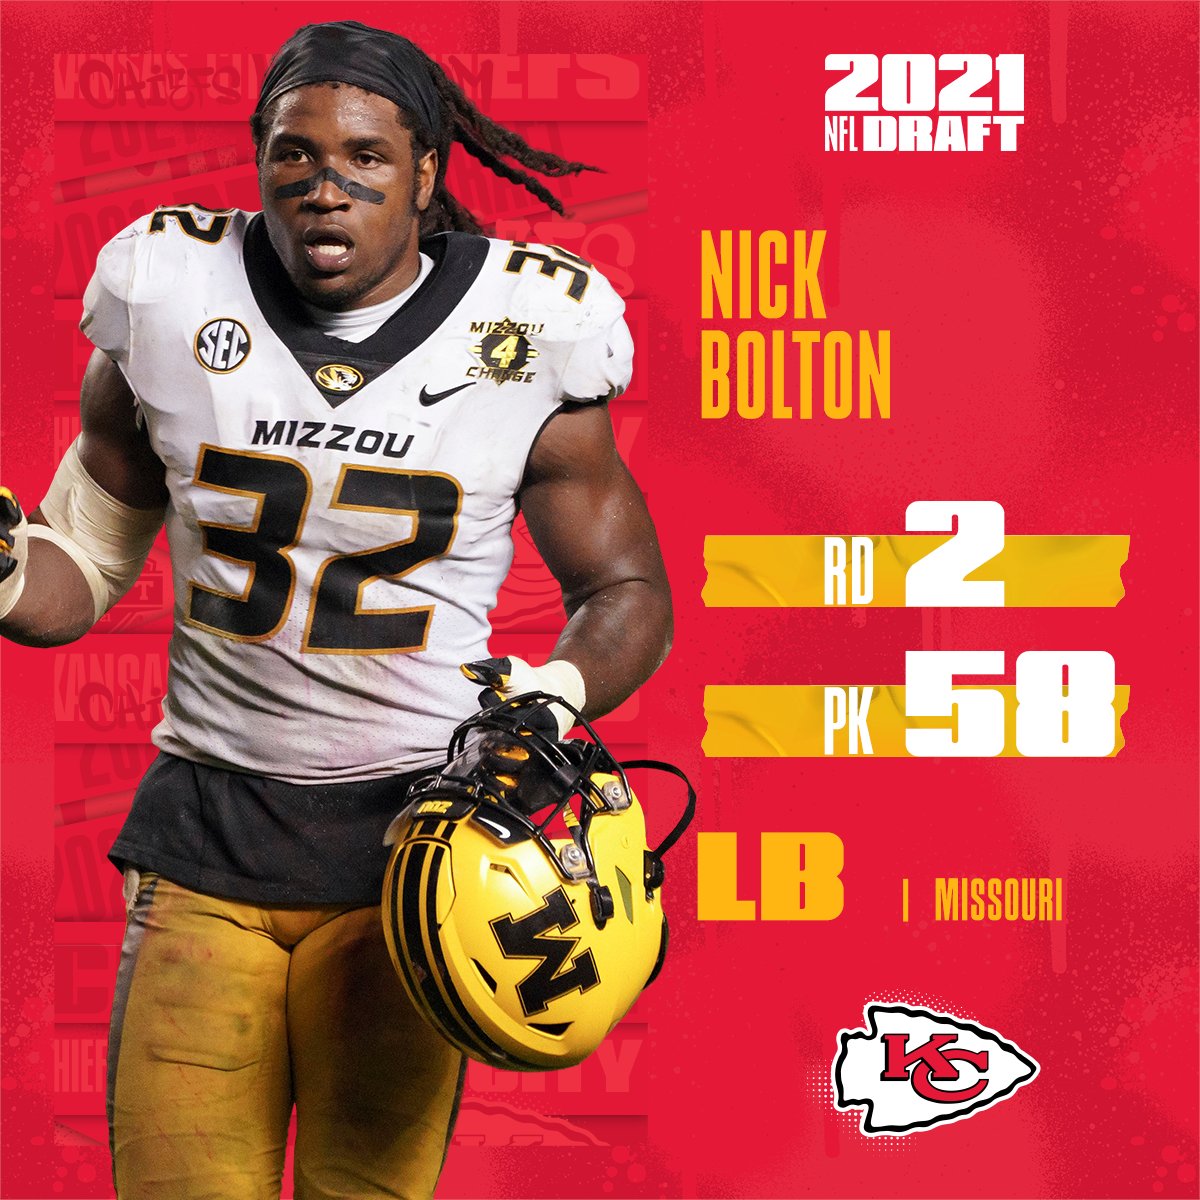 With the No. 58 overall pick in the 2021 @NFLDraft, the @Chiefs select LB Nick Bolton! 📺: 2021 #NFLDraft on NFLN/ESPN/ABC